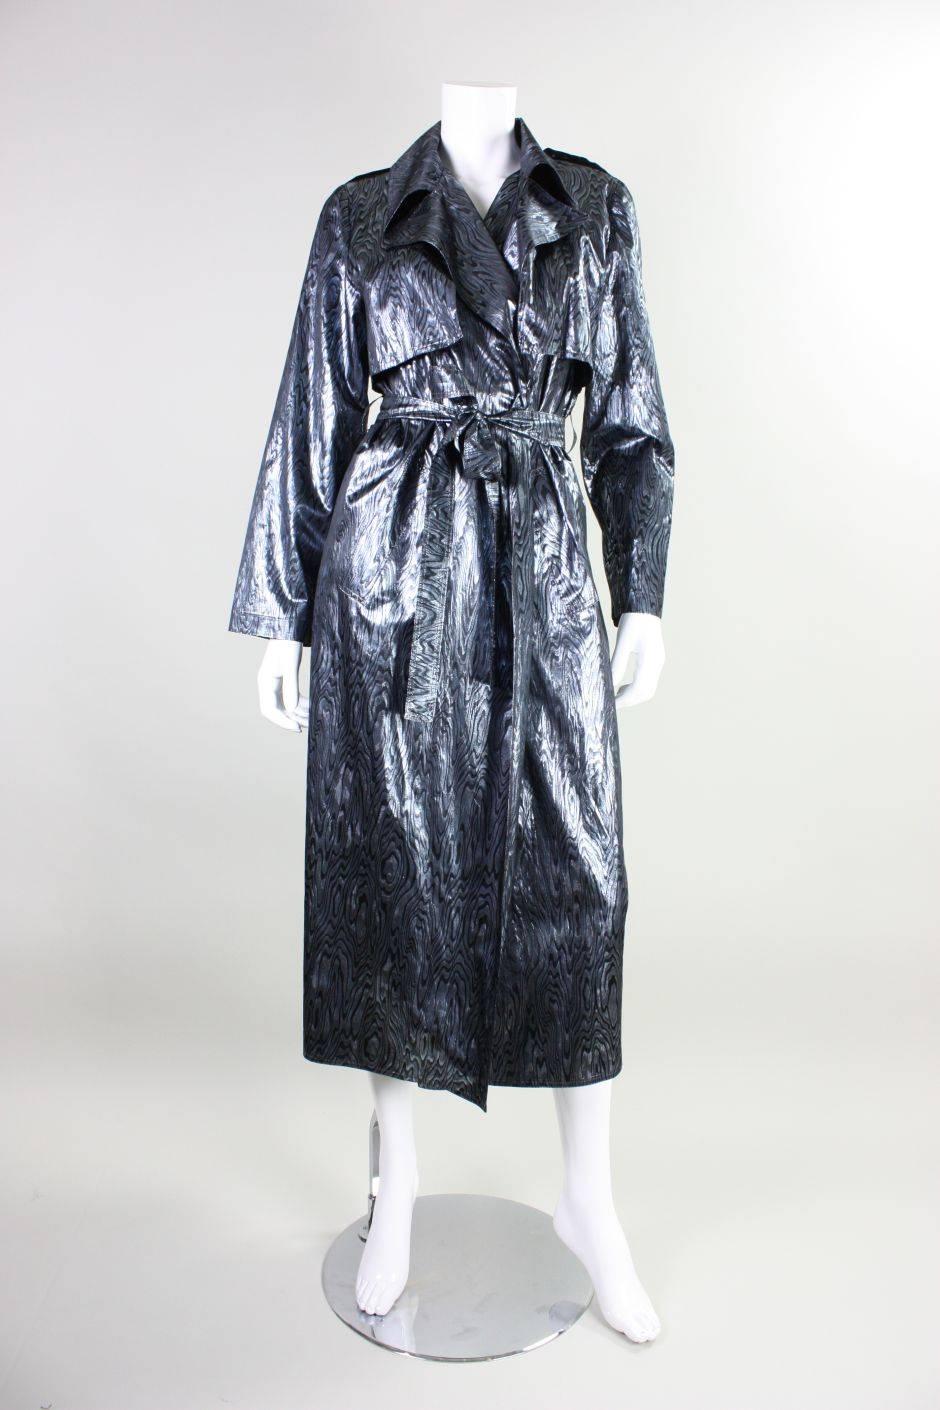 Vintage trench coat by Vicky Tiel retailed at Bergdorf Goodman and dates to the 1980's through 1990's.  It is made of silver and black lame fabric with a woodgrain pattern.  Slanted pockets at hip. Center back vent. Unlined. No closures outside of a